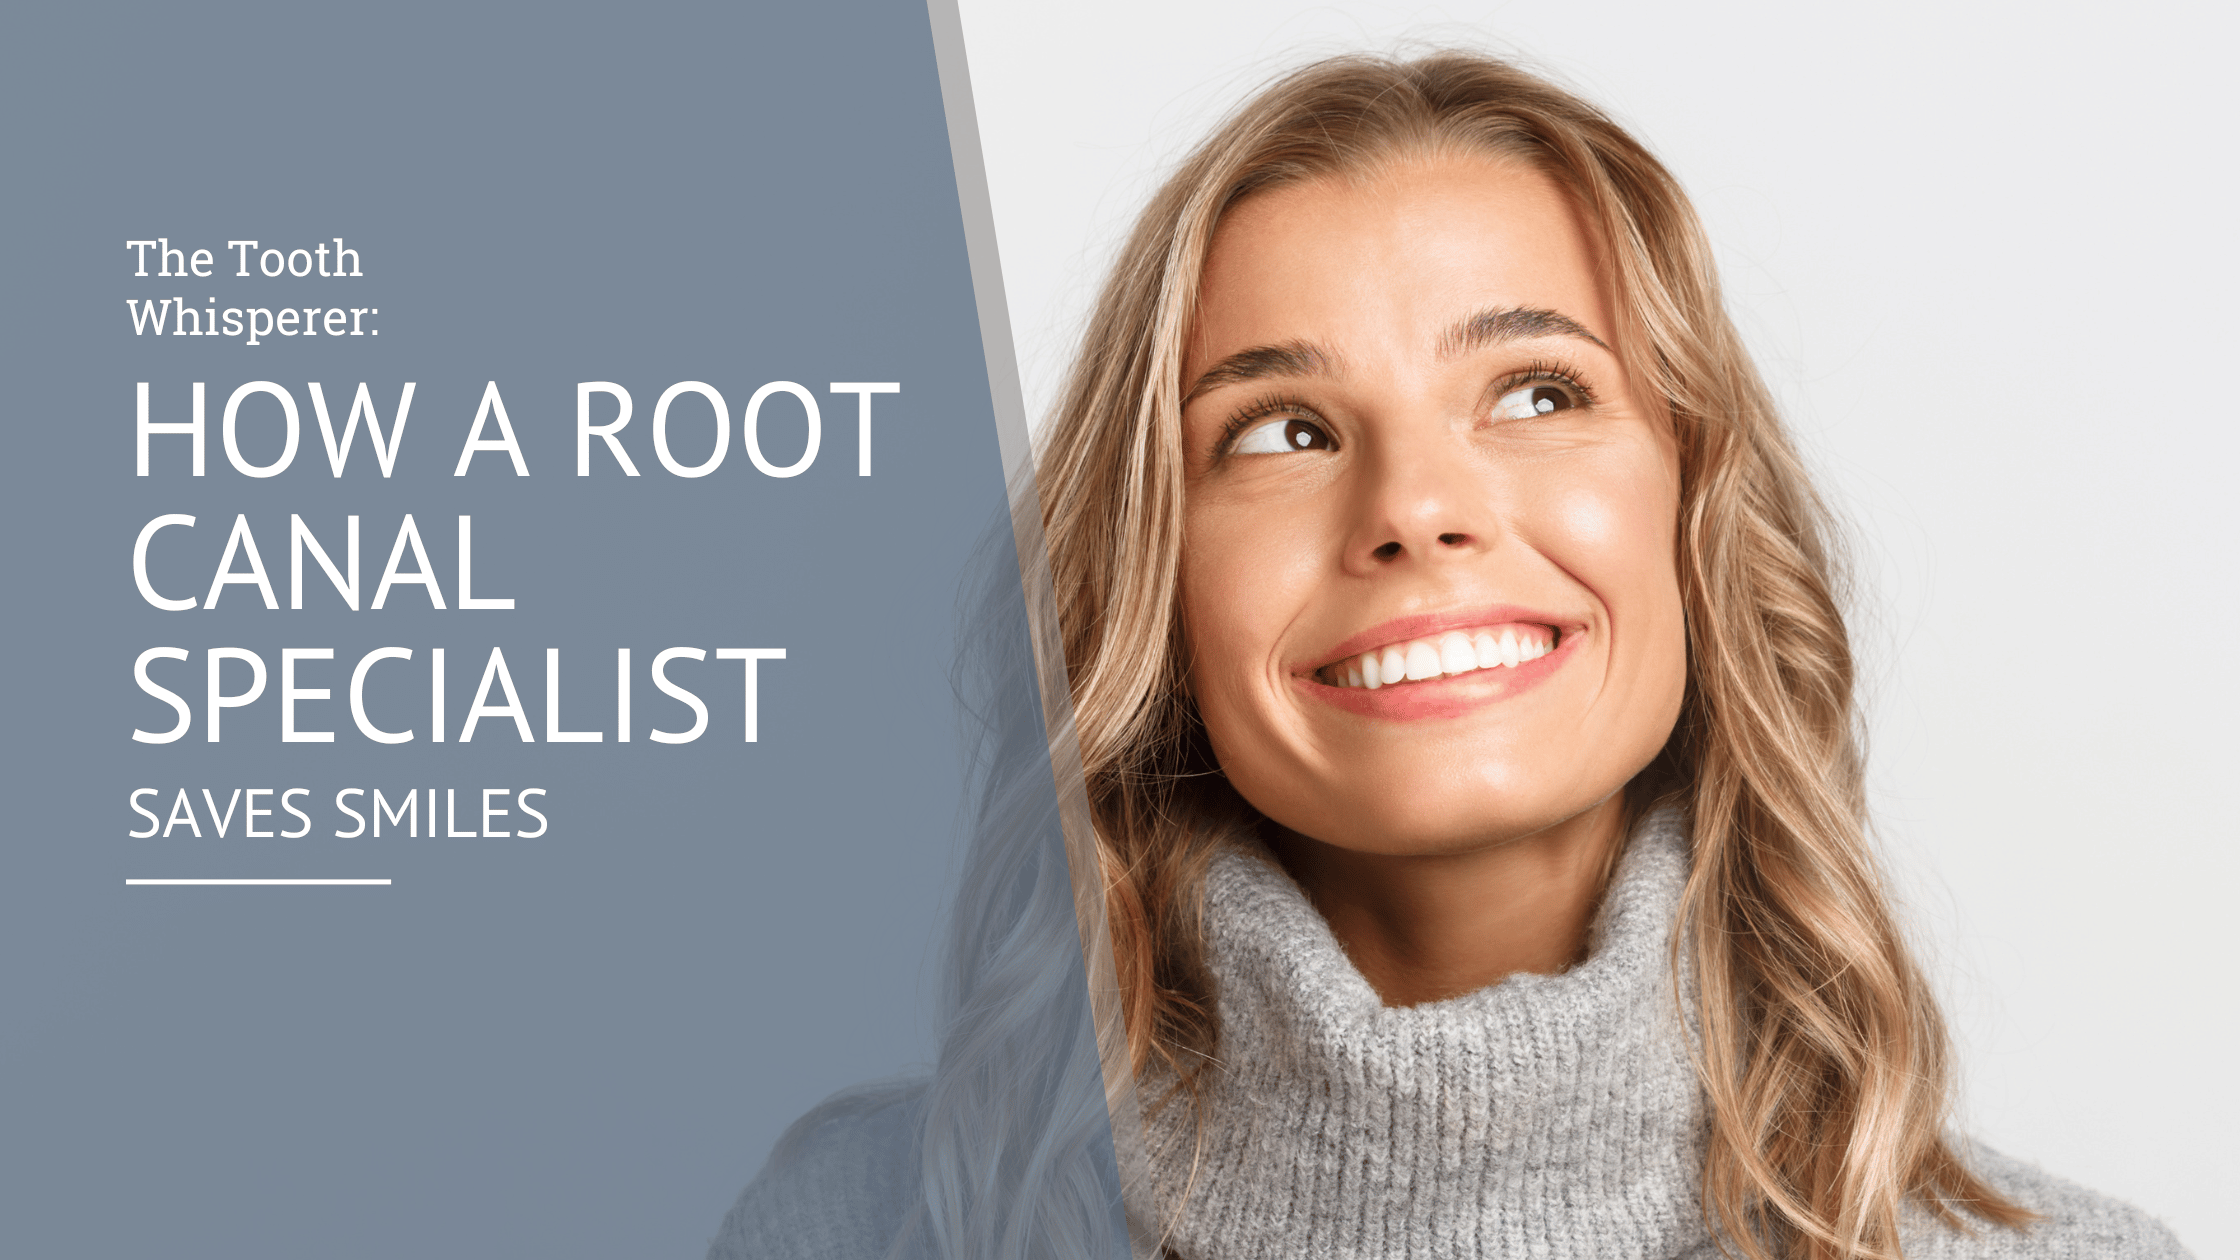 The Tooth Whisperer: How a Root Canal Specialist Saves Smiles